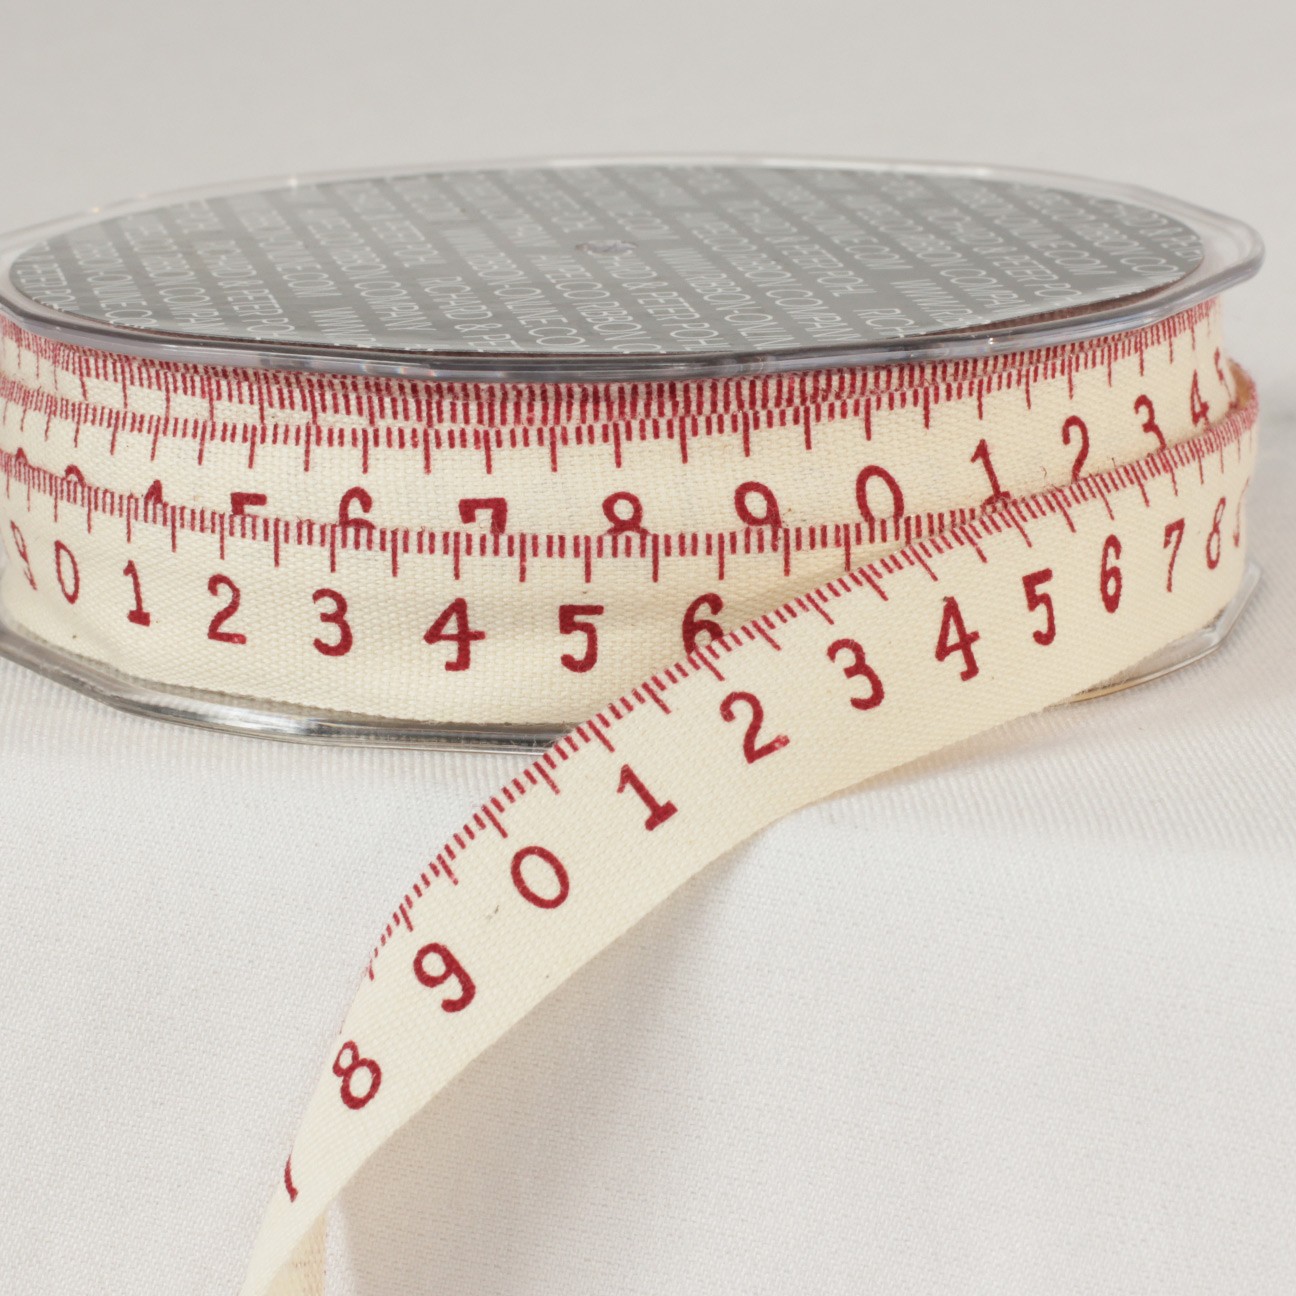 Ribbon Tape Measure - RTM - IdeaStage Promotional Products